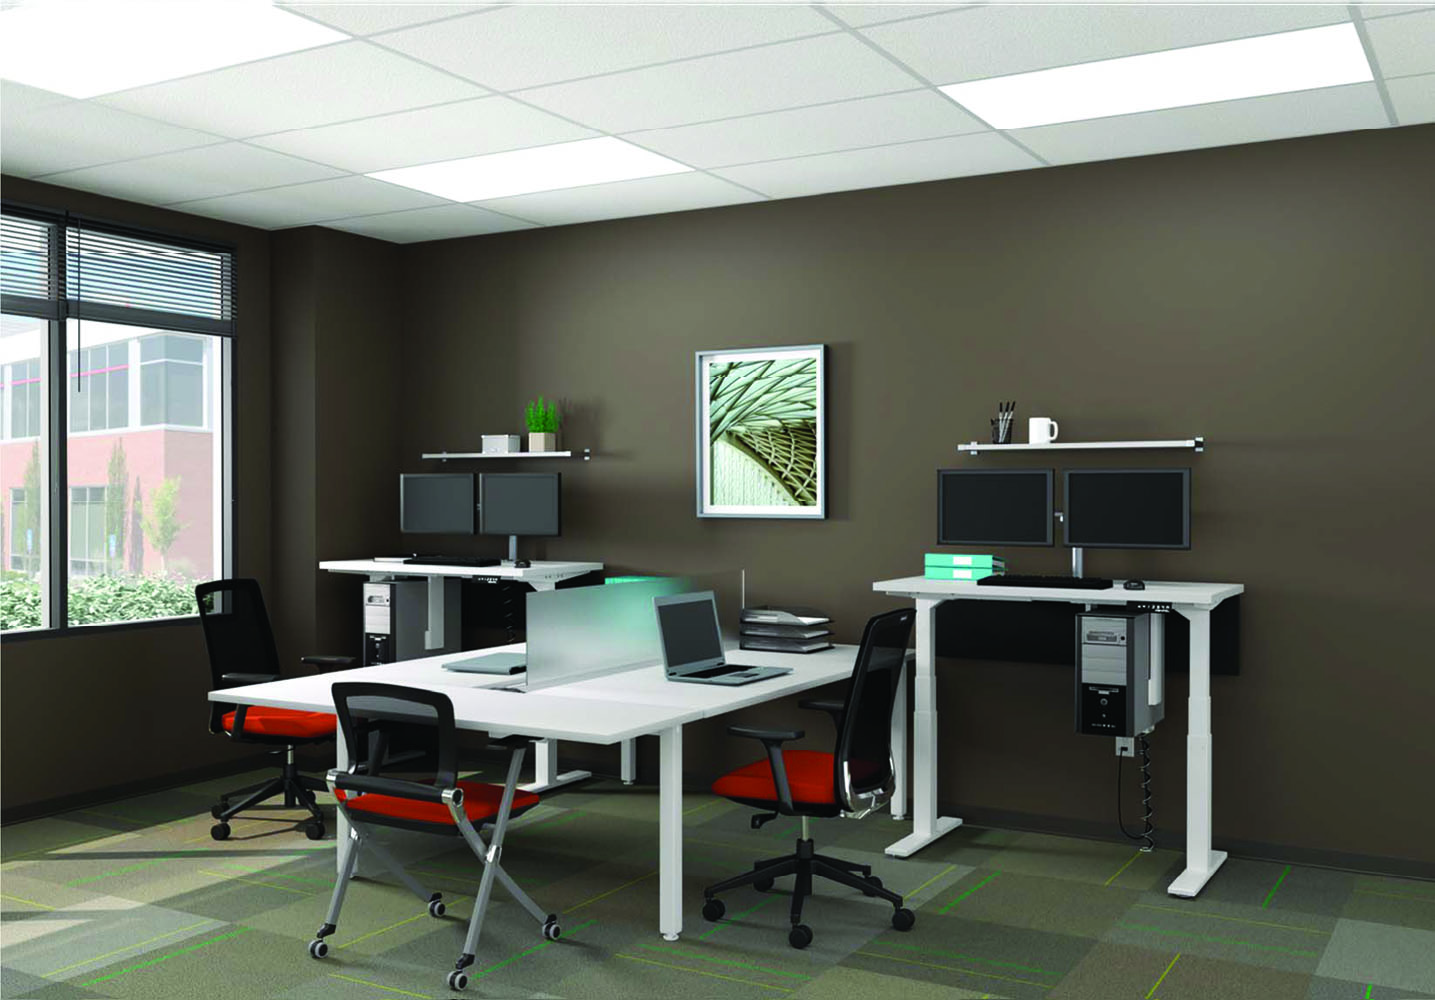 Modular Workstations - Team Spaces Office Furniture Sets